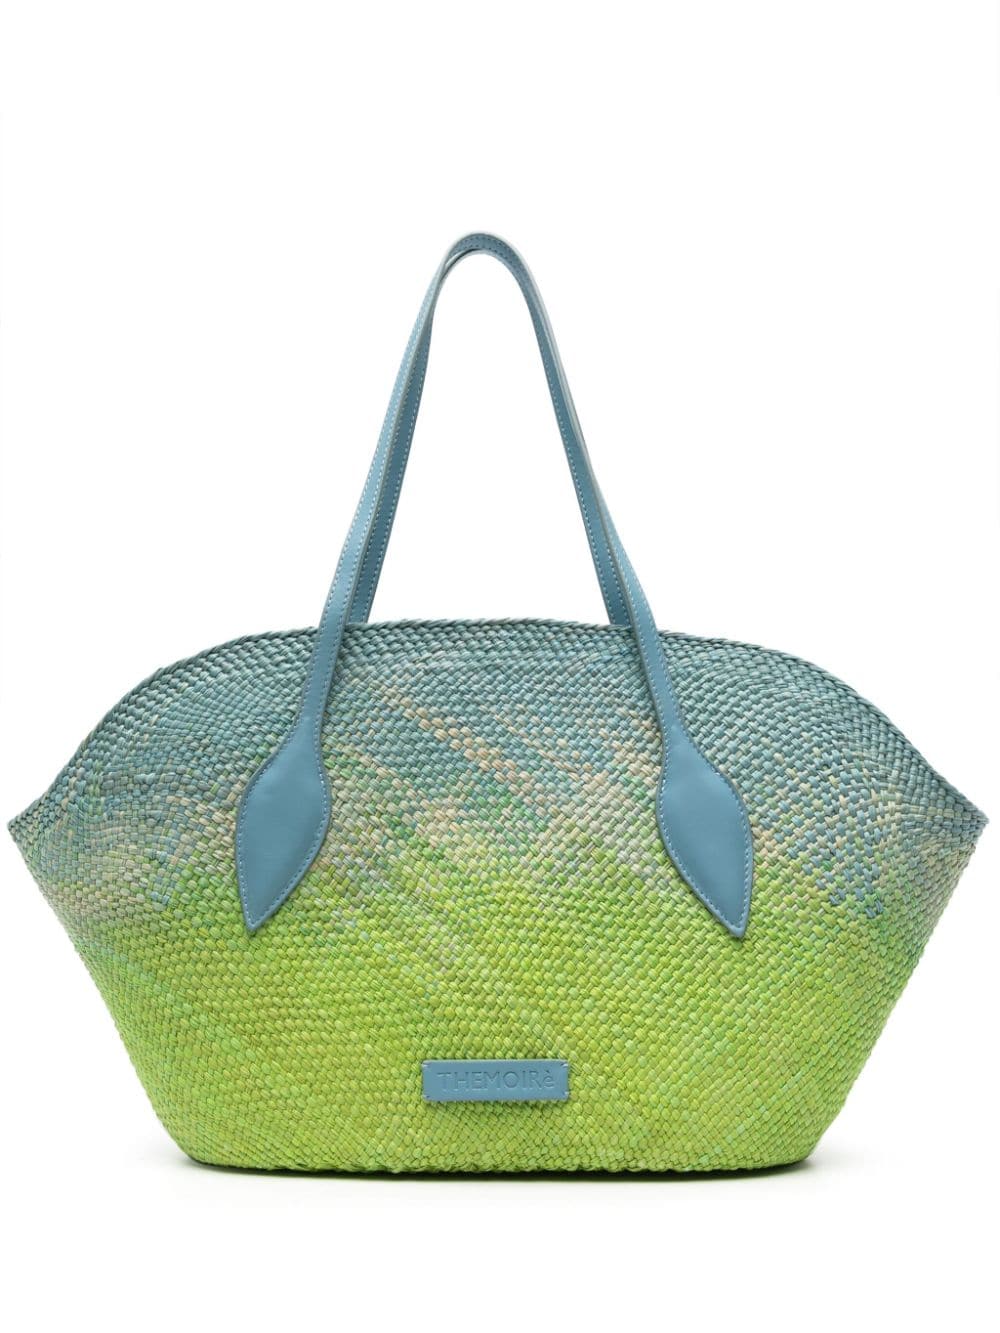 Themoirè Flor Straw Degrade Tote Bag In Blue And Green